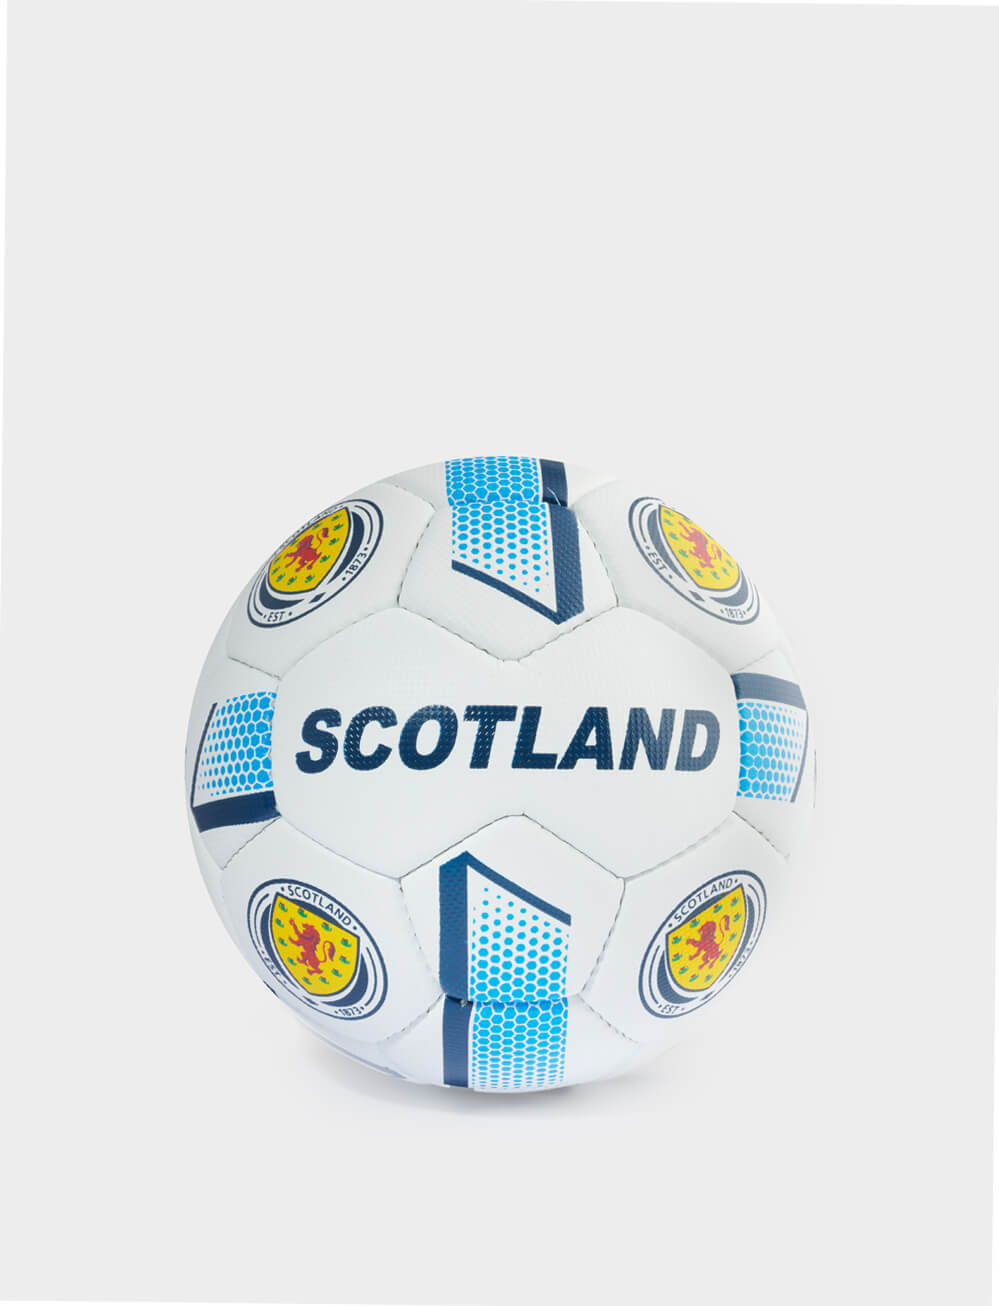 Official Team Scotland Size 3 Football - The World Football Store